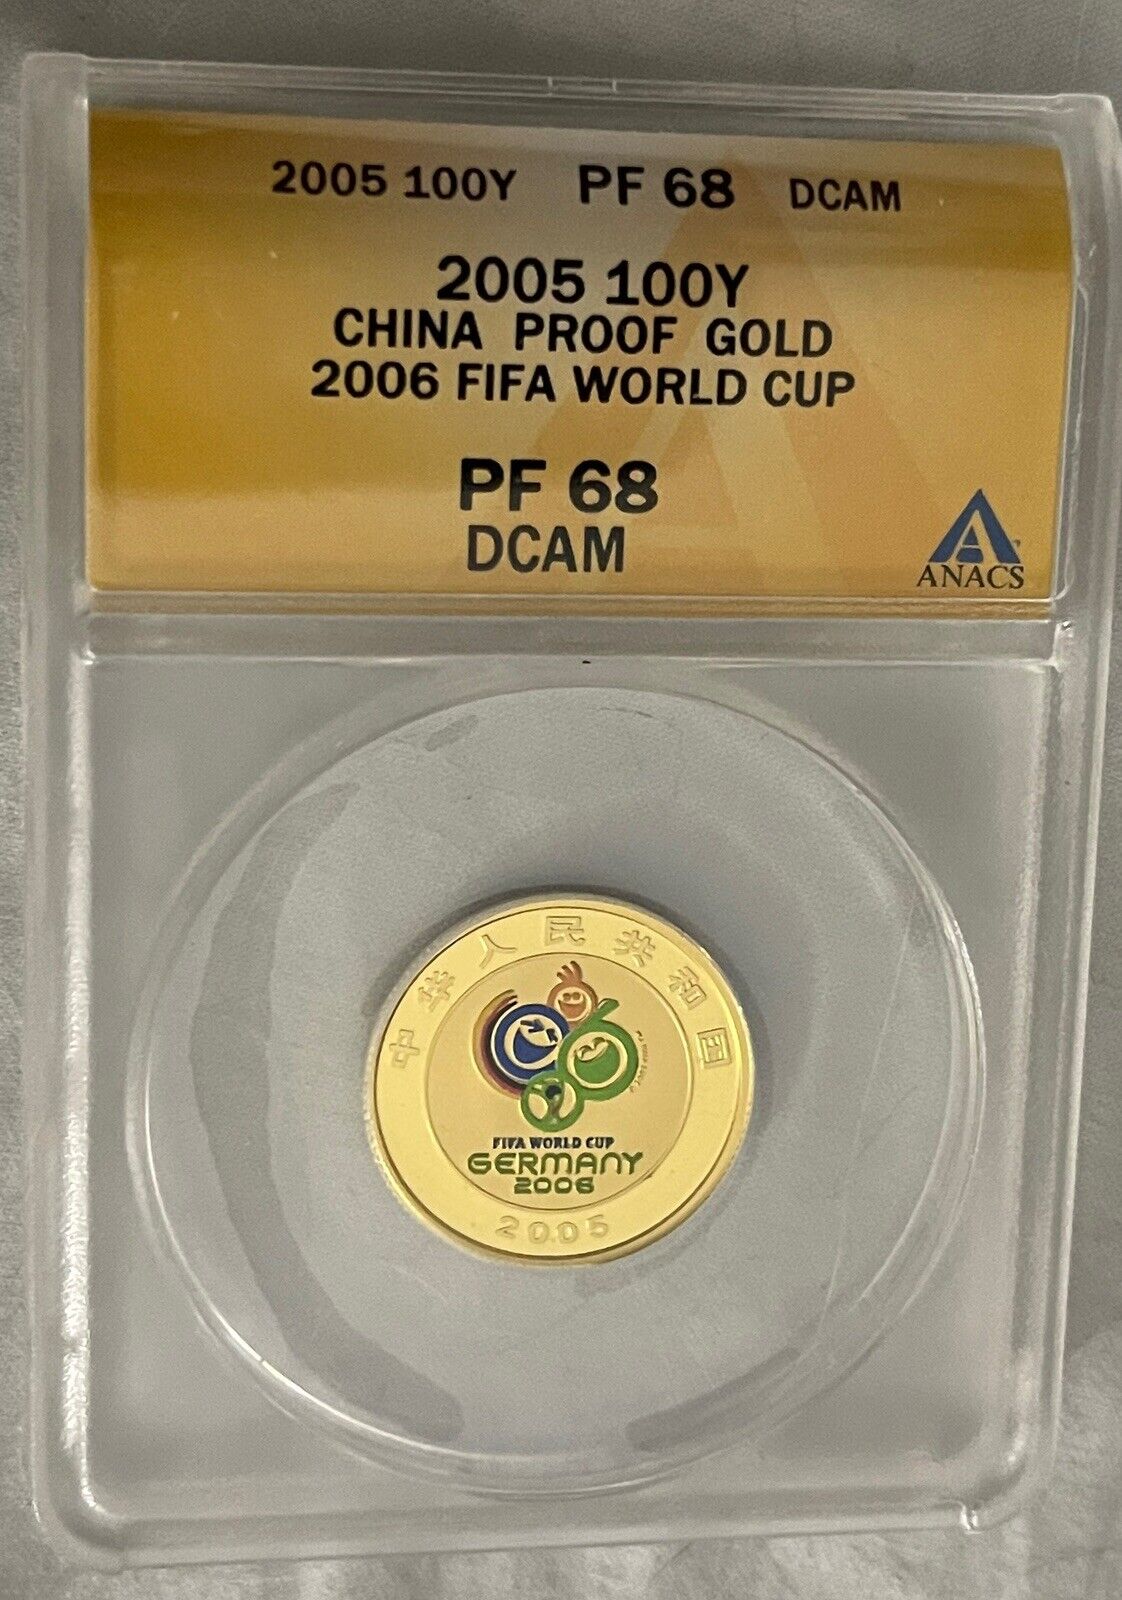 2005 100Y China Proof Gold 2006 FIFA WORLD CUP PF 68 CAM SHINY